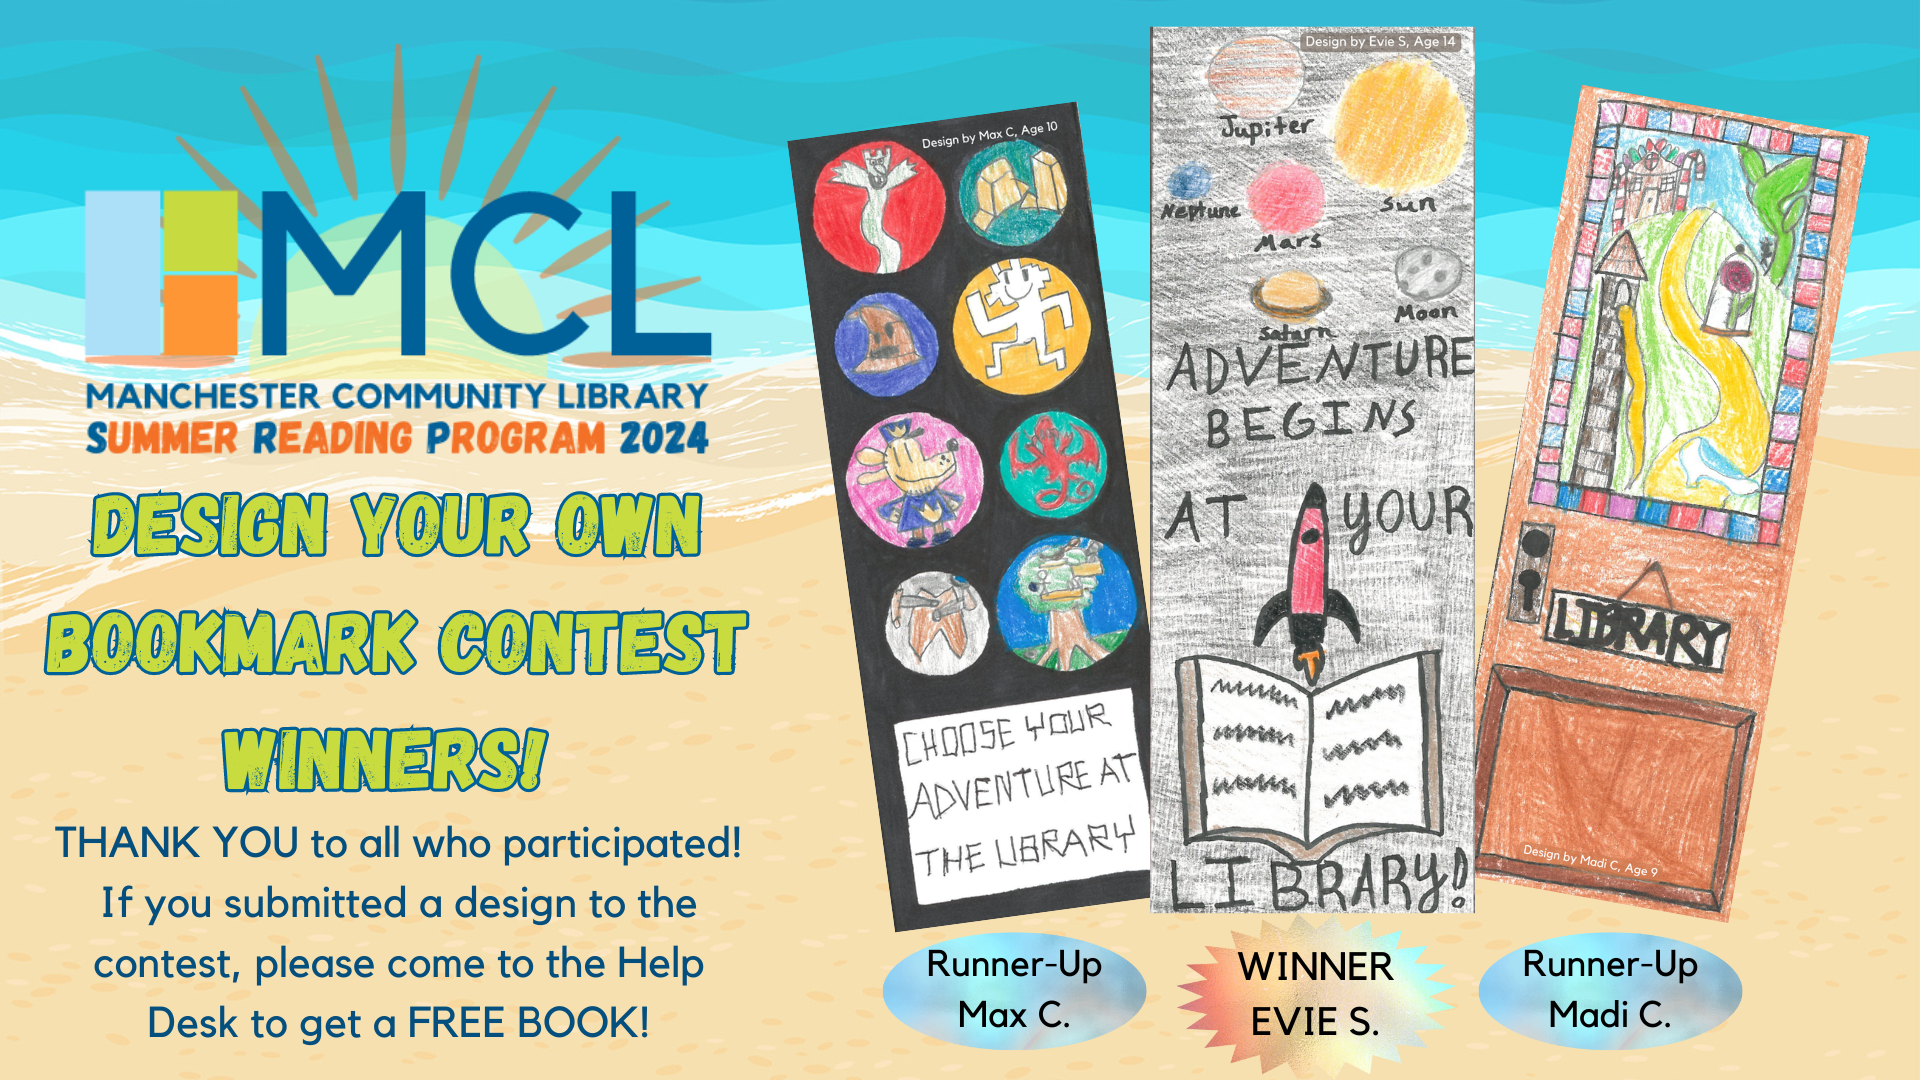 Summer Reading Program 2024 Design Your Own Bookmark Contest Winners!